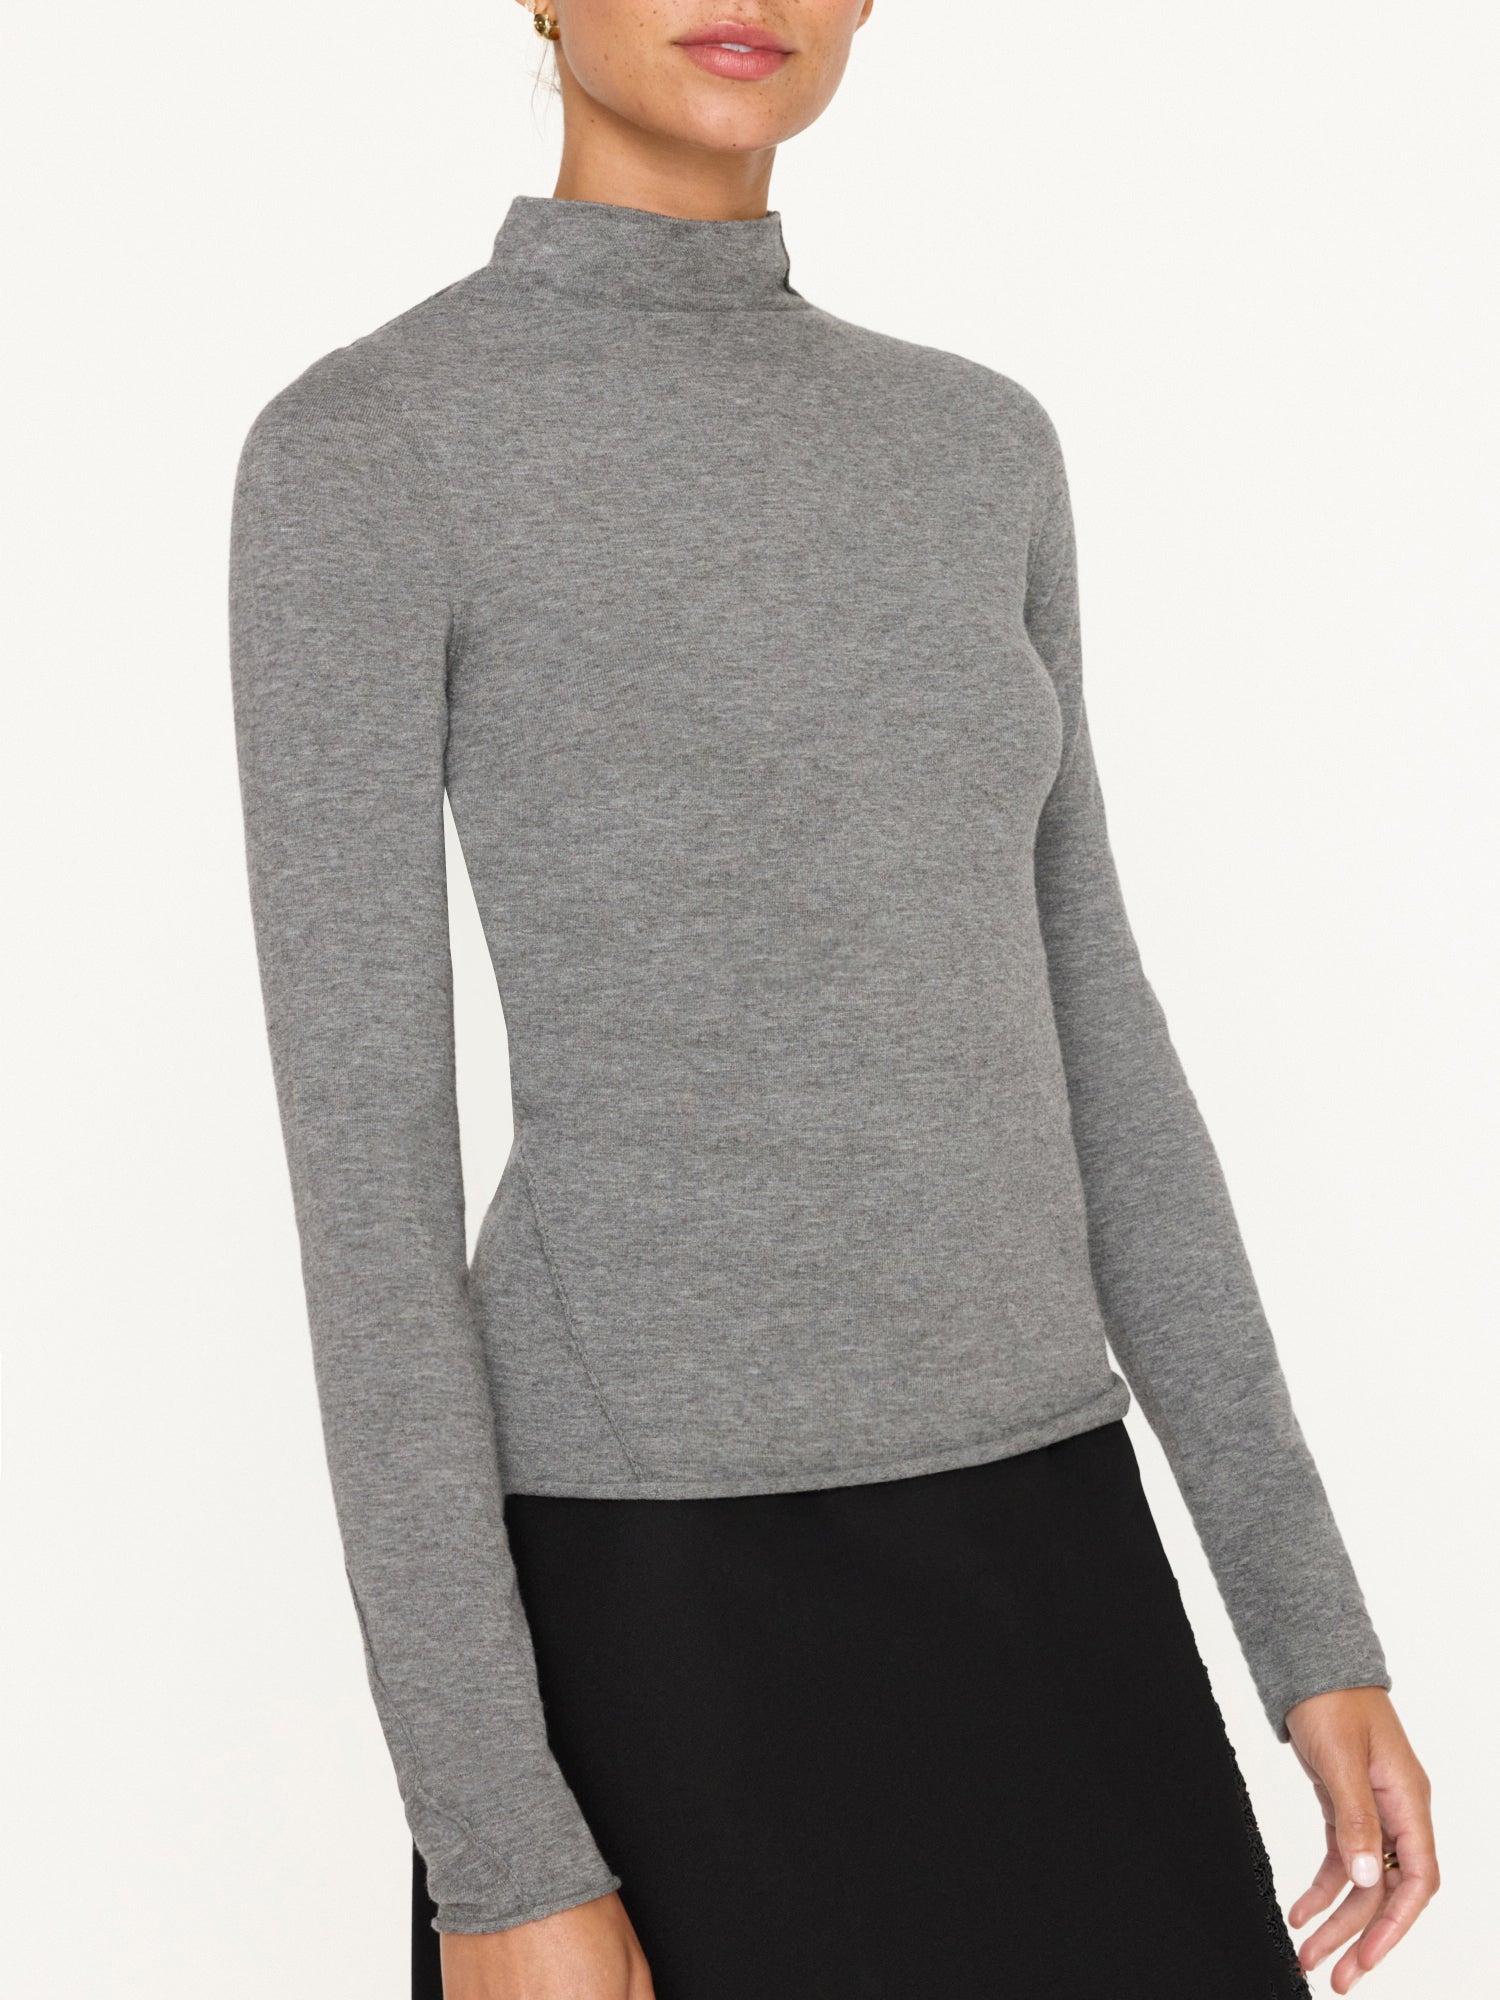 Anika grey mock neck top front view 3